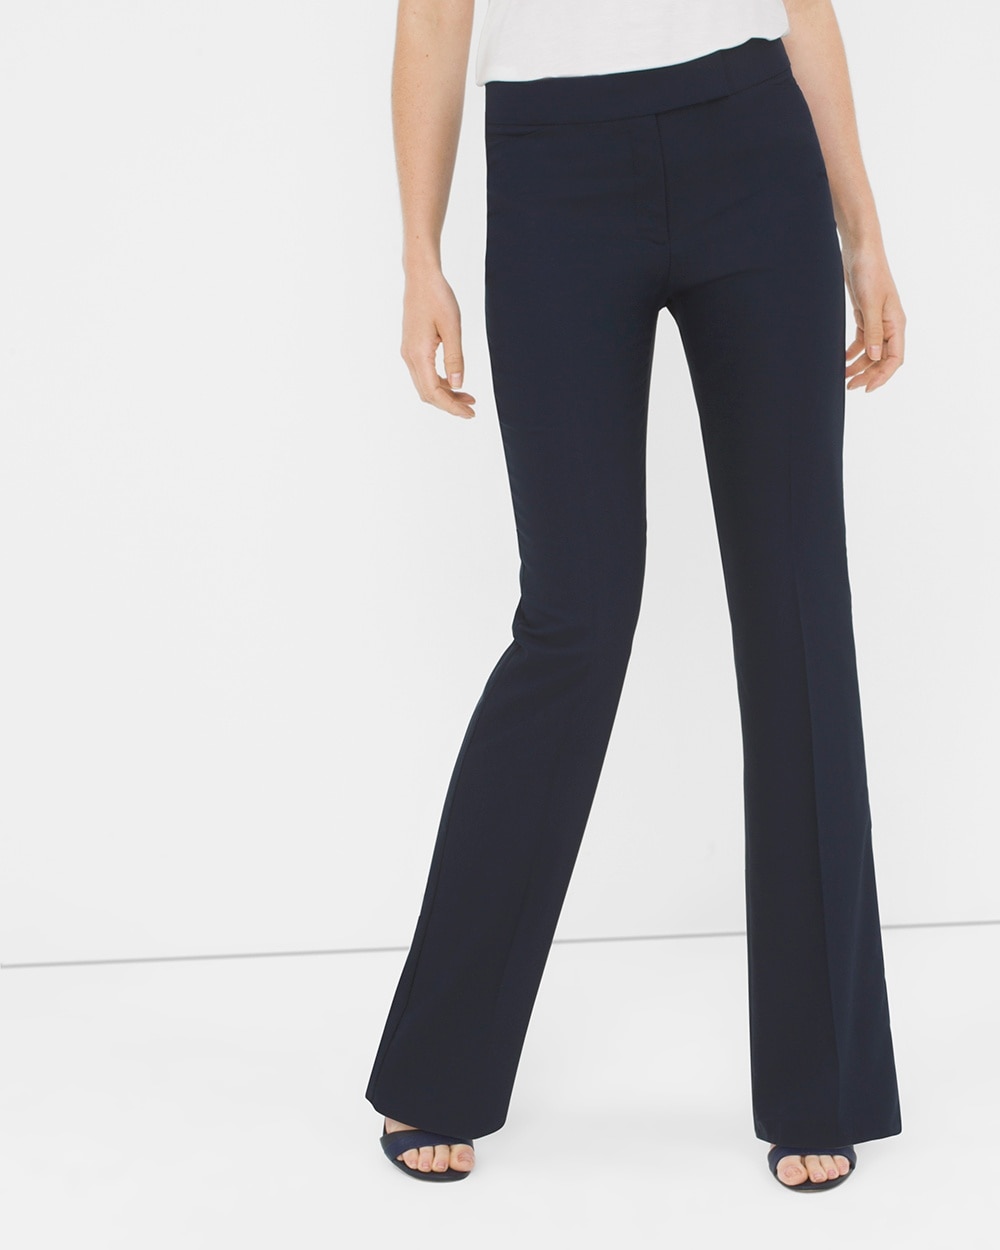 Summerweight Flare Pants - WHBM